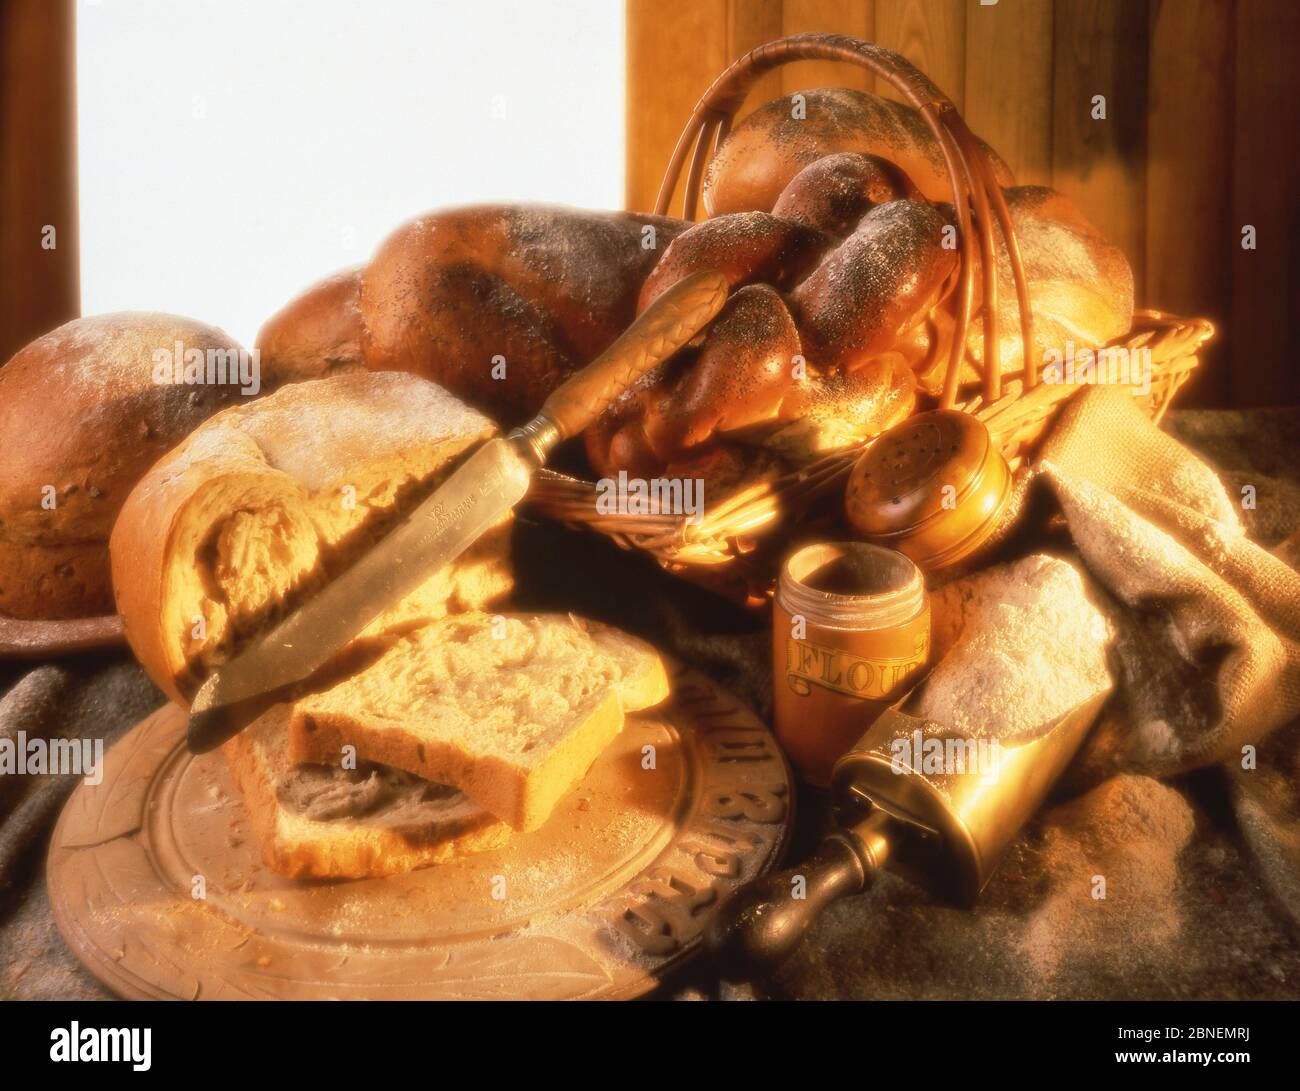 Selection of breads, breadboard and flour, Winkfield, Berkshire, England, United Kingdom Stock Photo